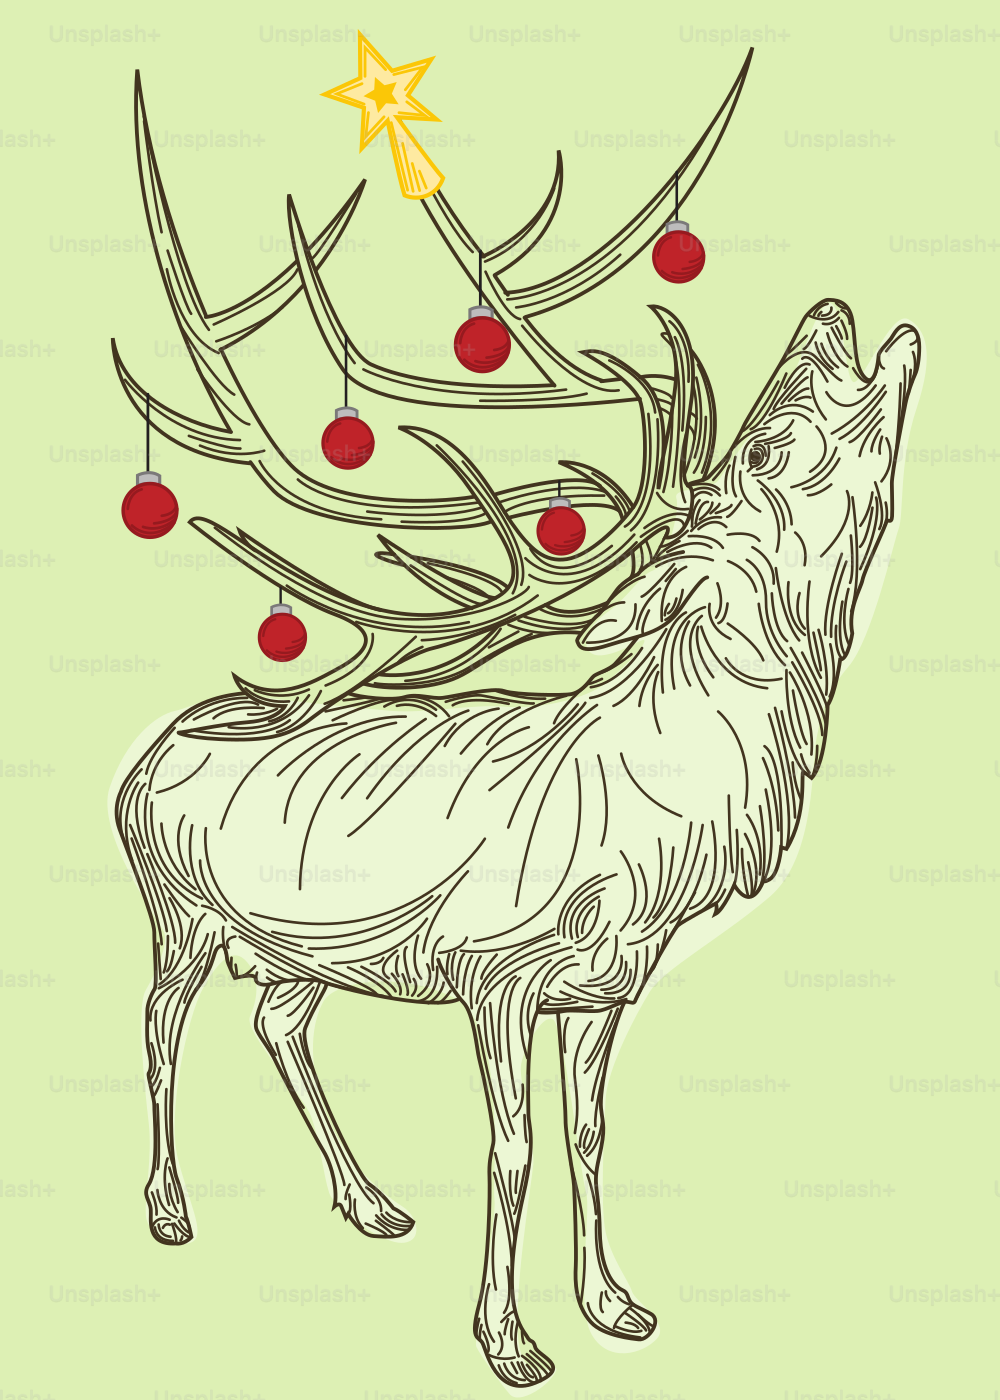 Elton the Christmas Elk, one of the holiday's lesser known mascots...